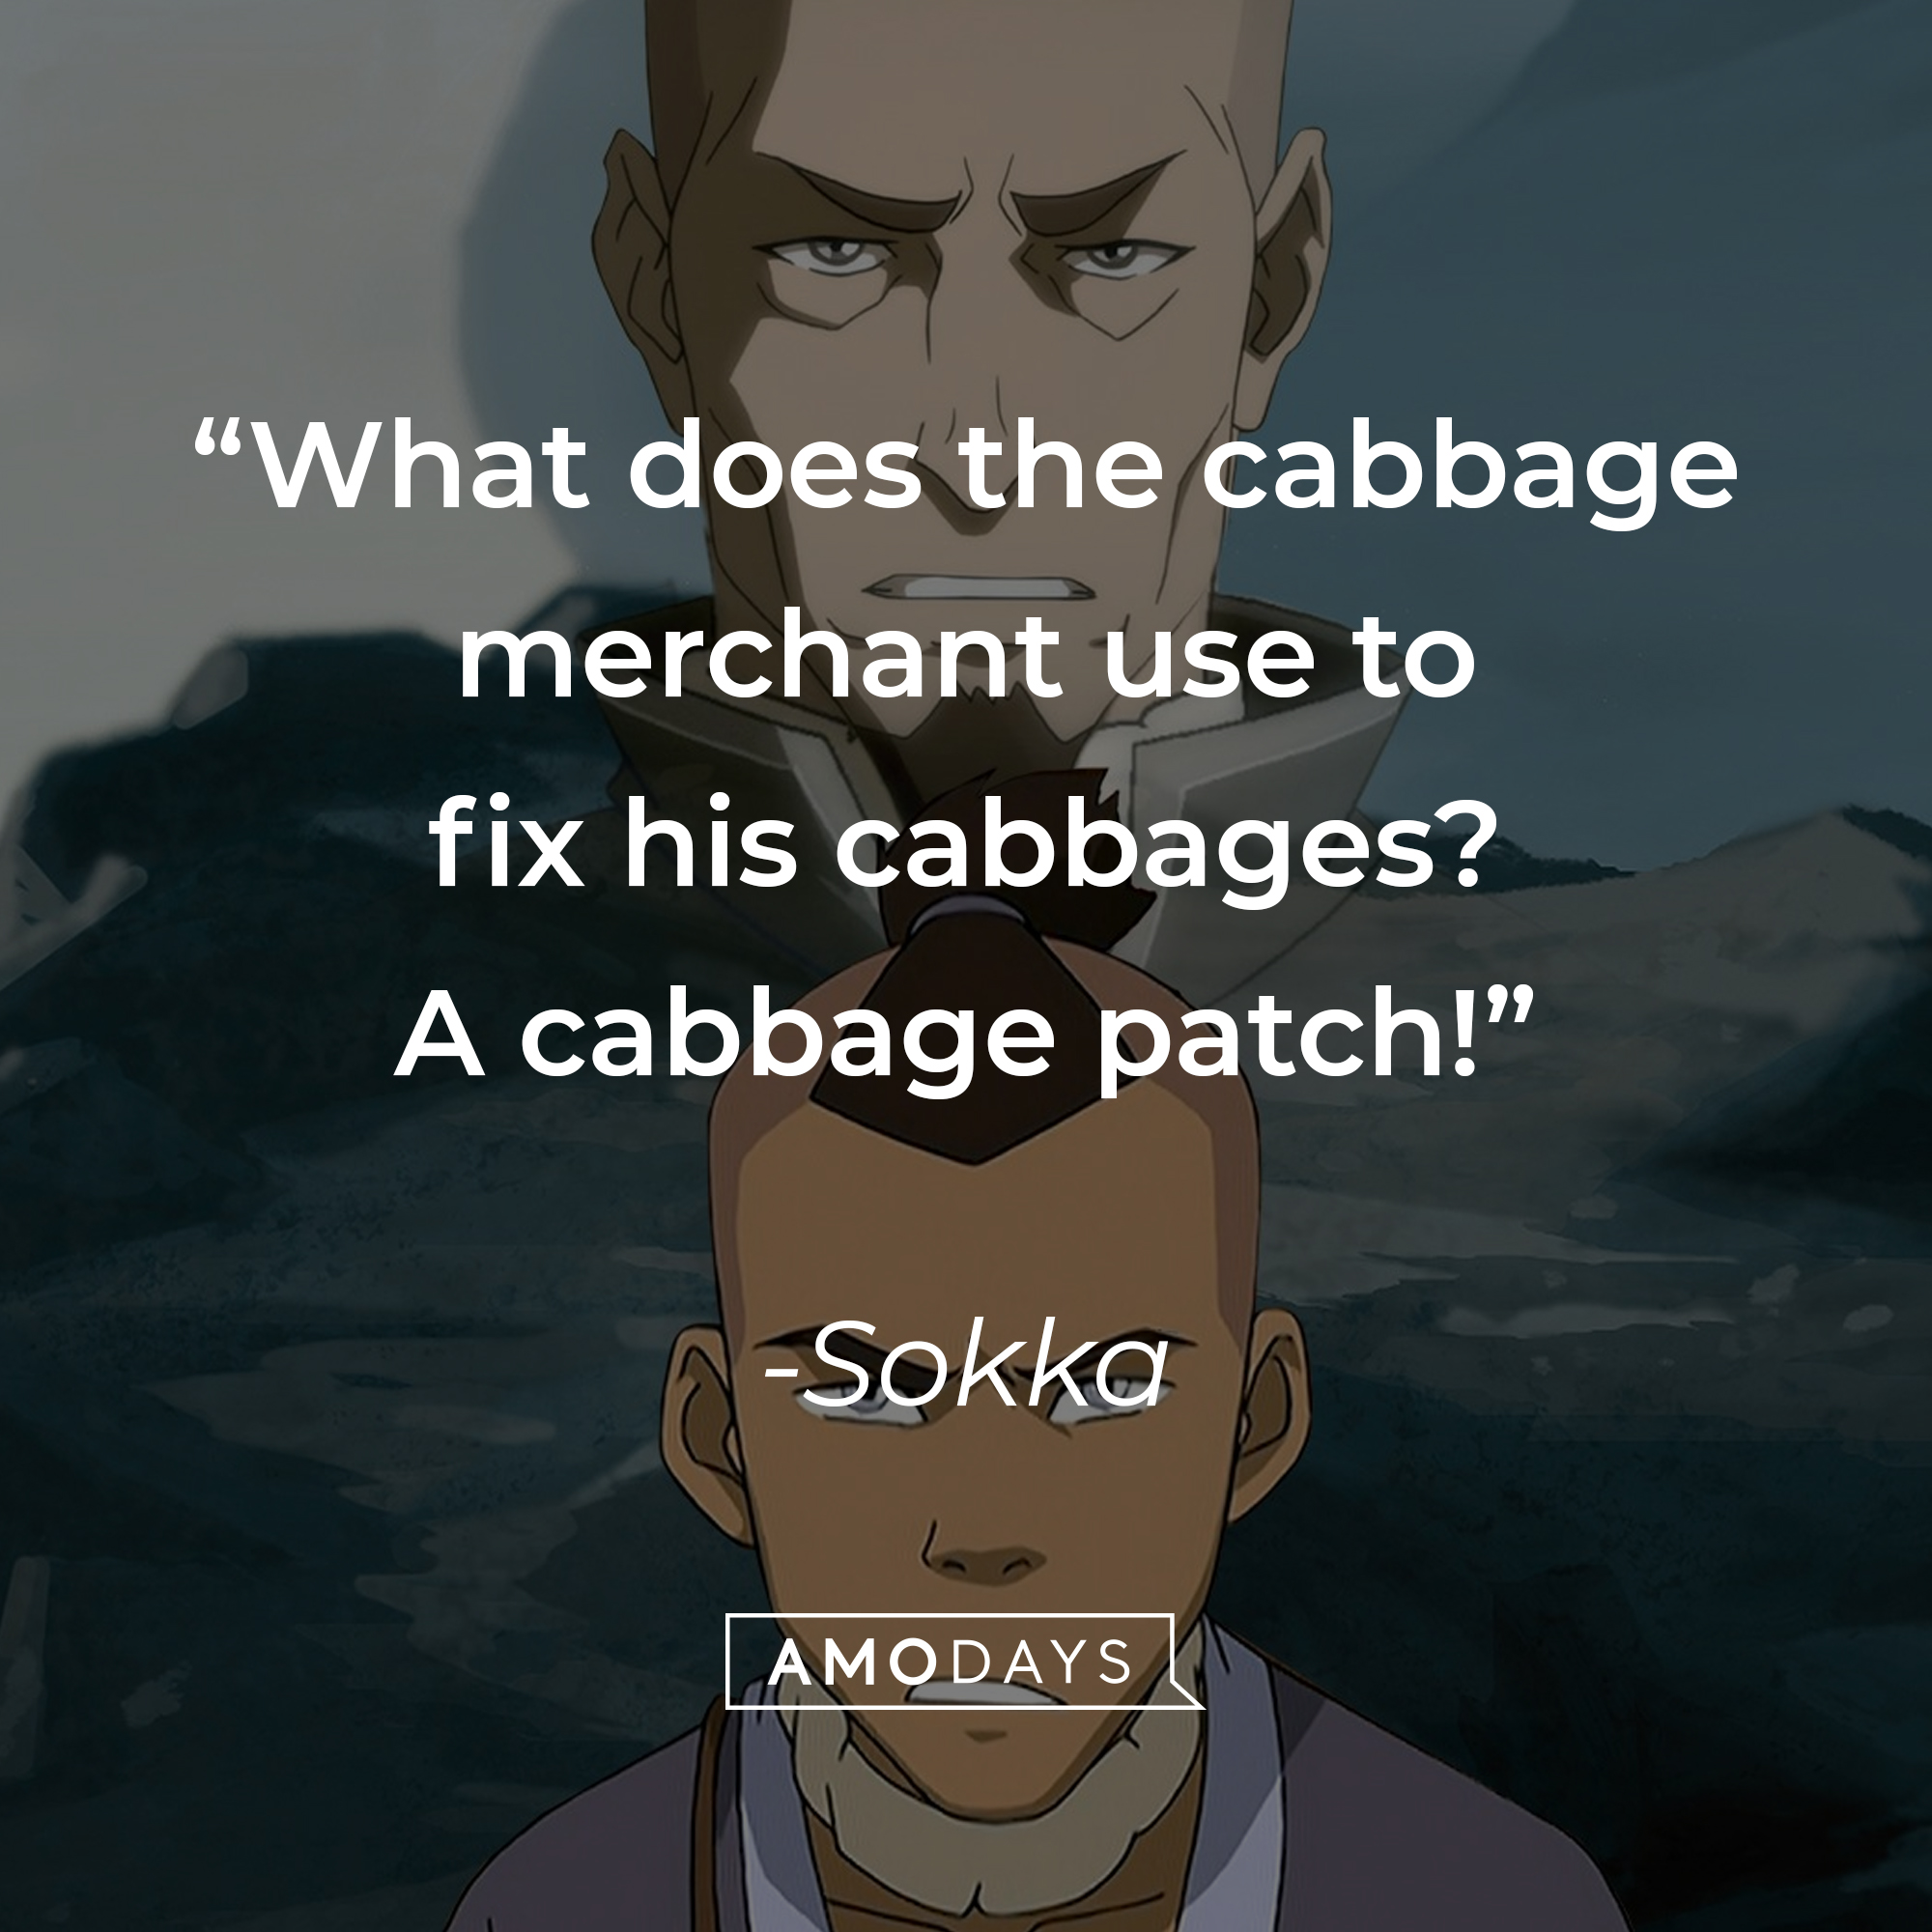 Sokka's quote: "What does the cabbage merchant use to fix his cabbages? A cabbage patch!" | Source: facebook.com/avatarthelastairbender